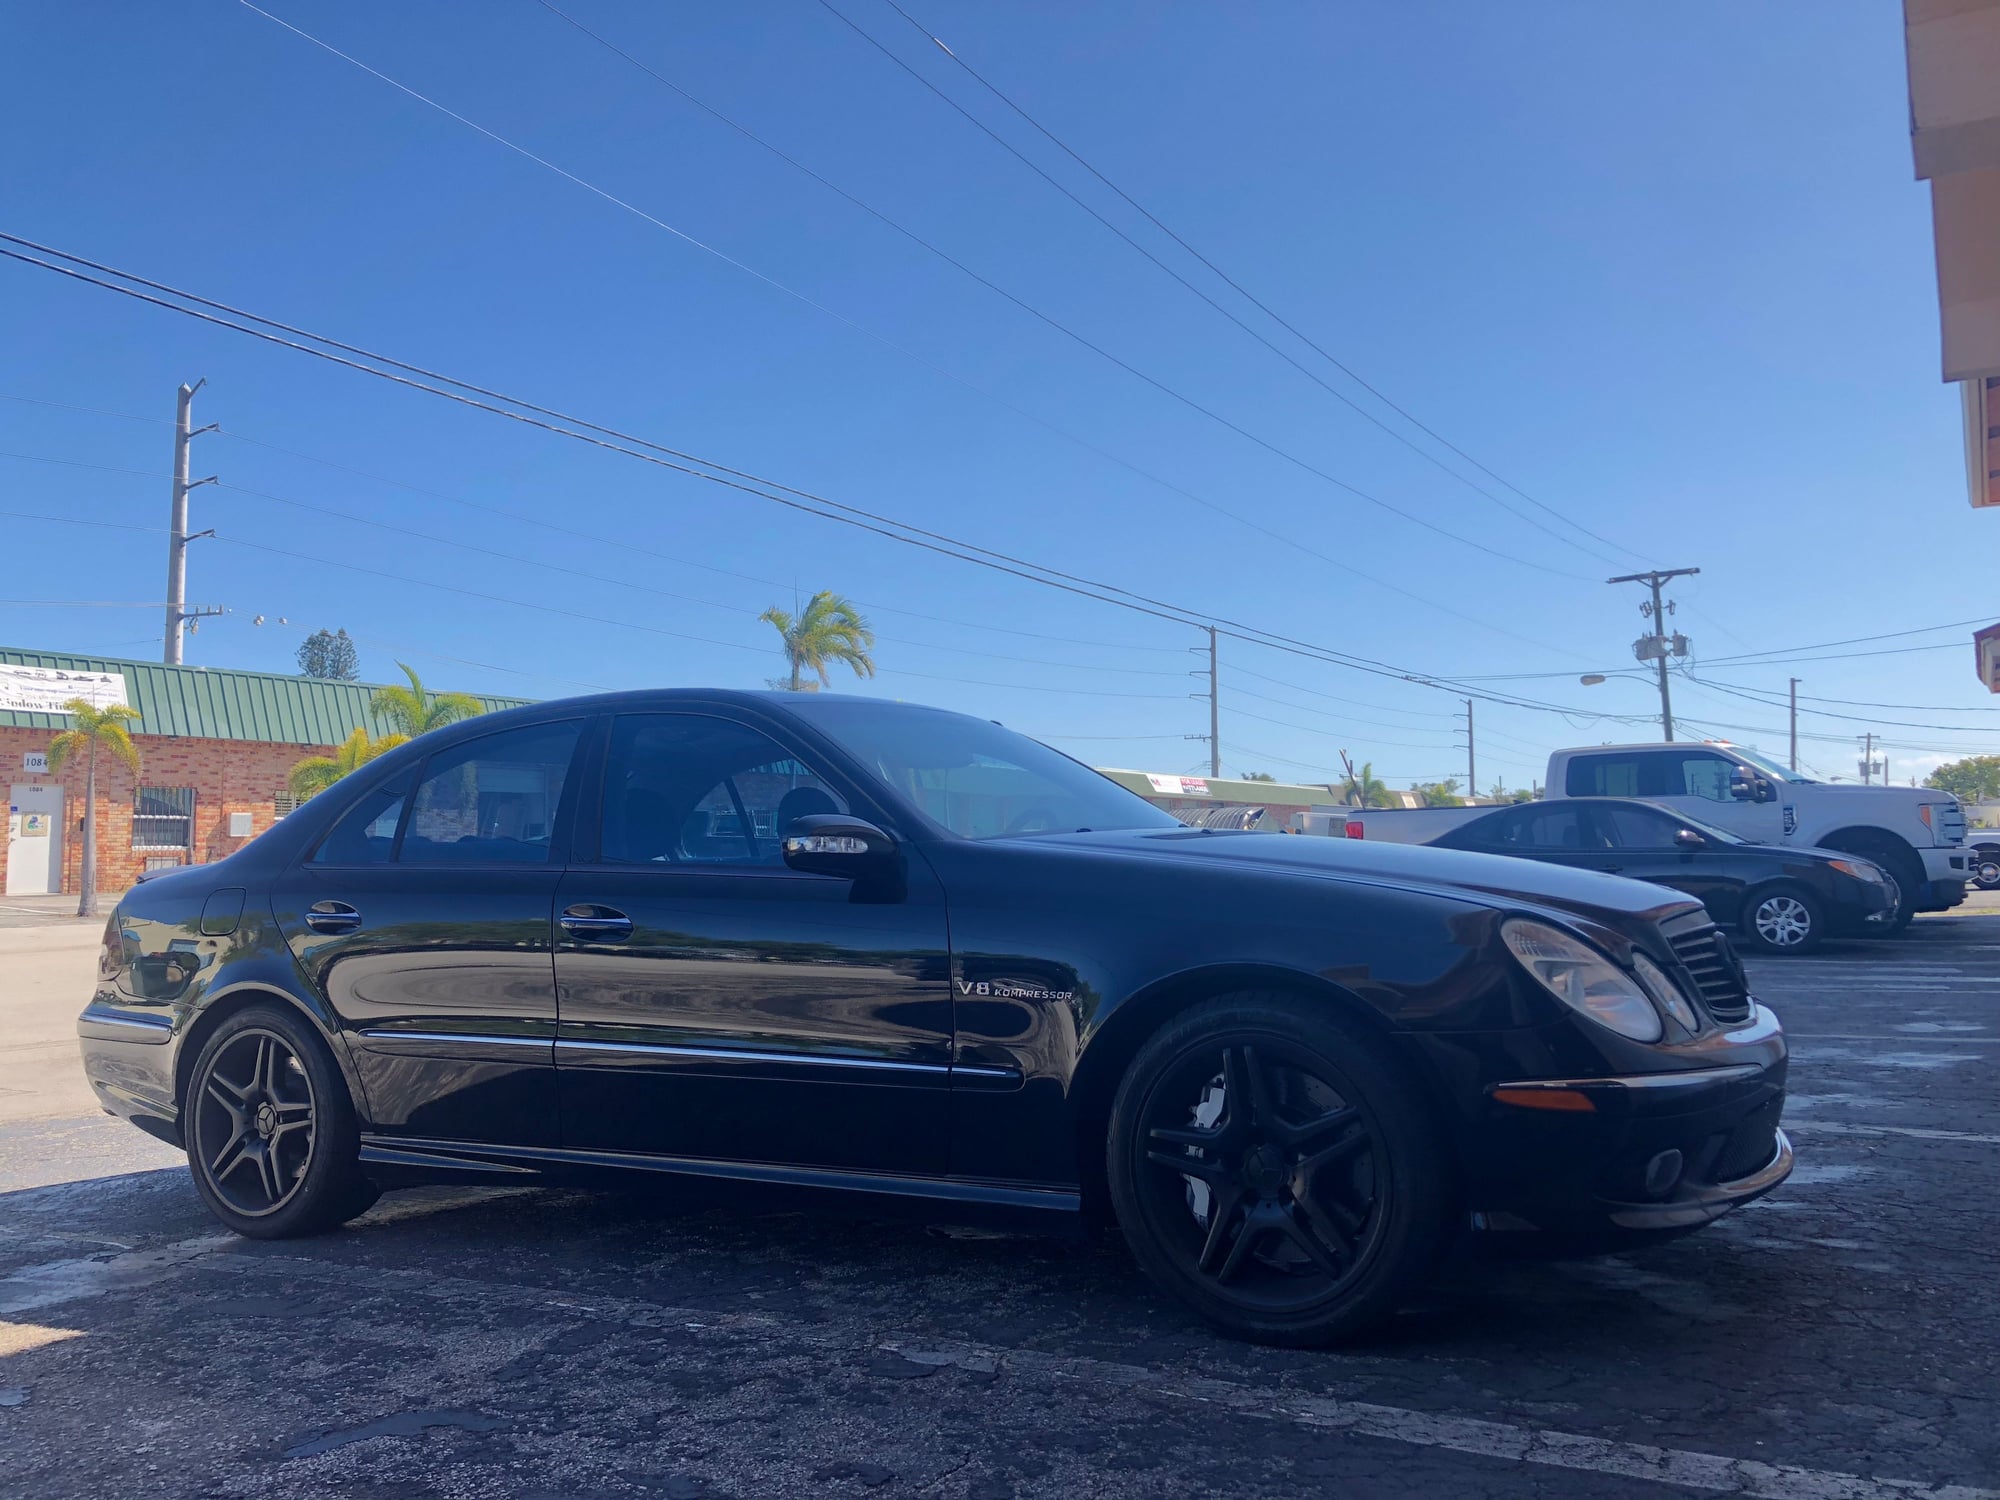 2003 Mercedes-Benz E55 AMG - 2003 E55 AMG 73500 Miles GREAT condition - Used - VIN WDBUF76J63A392990 - 75,300 Miles - 8 cyl - 2WD - Automatic - Sedan - Black - Boca Raton, FL 33434, United States